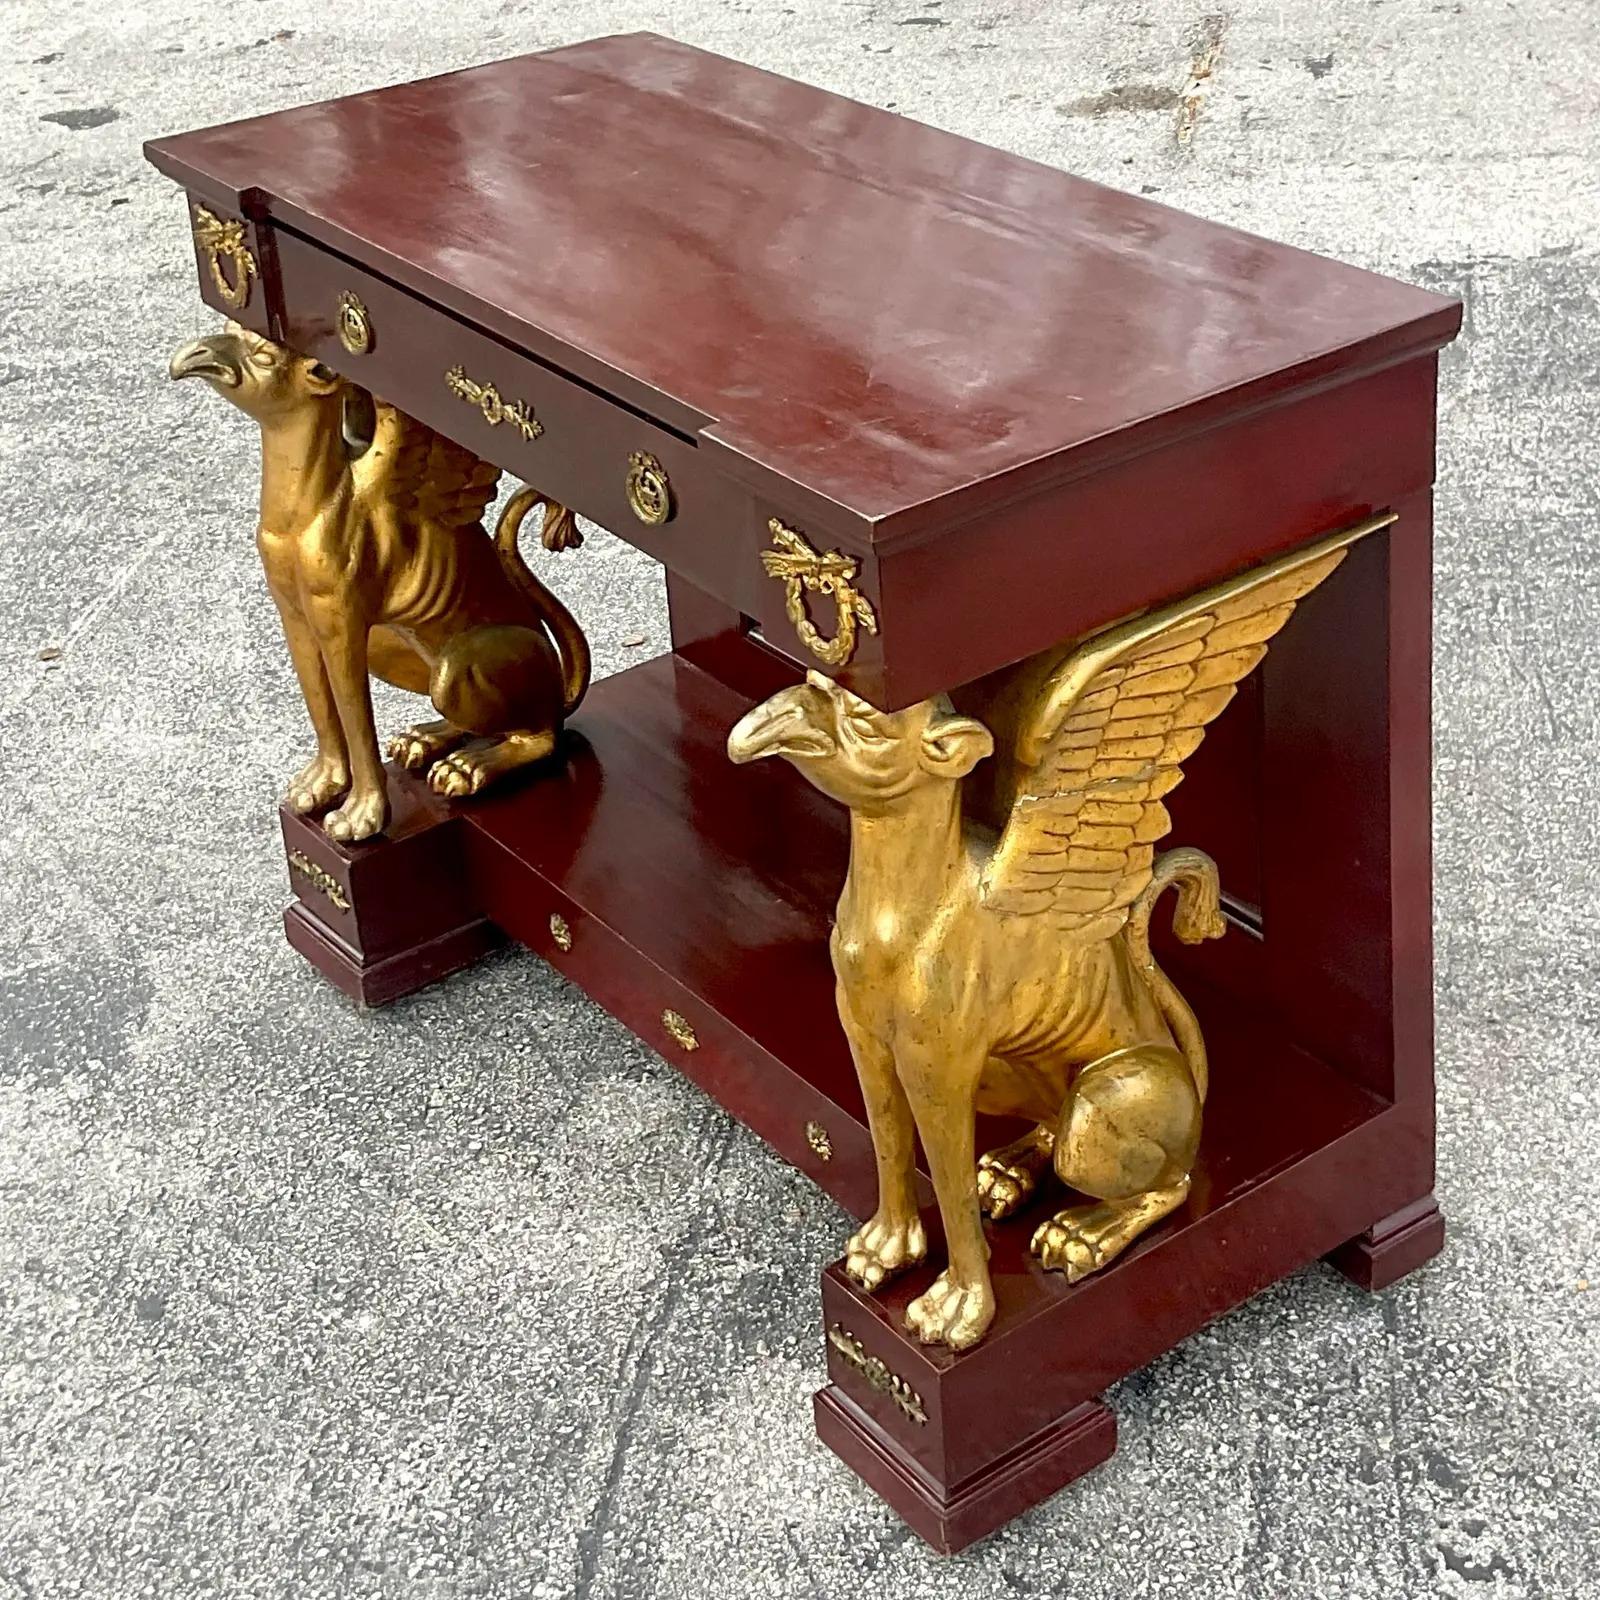 A stunning vintage Regency console table. Chic gilt griffins in a classic mahogany shape. A commanding presence. Acquired from a Palm Beach estate.